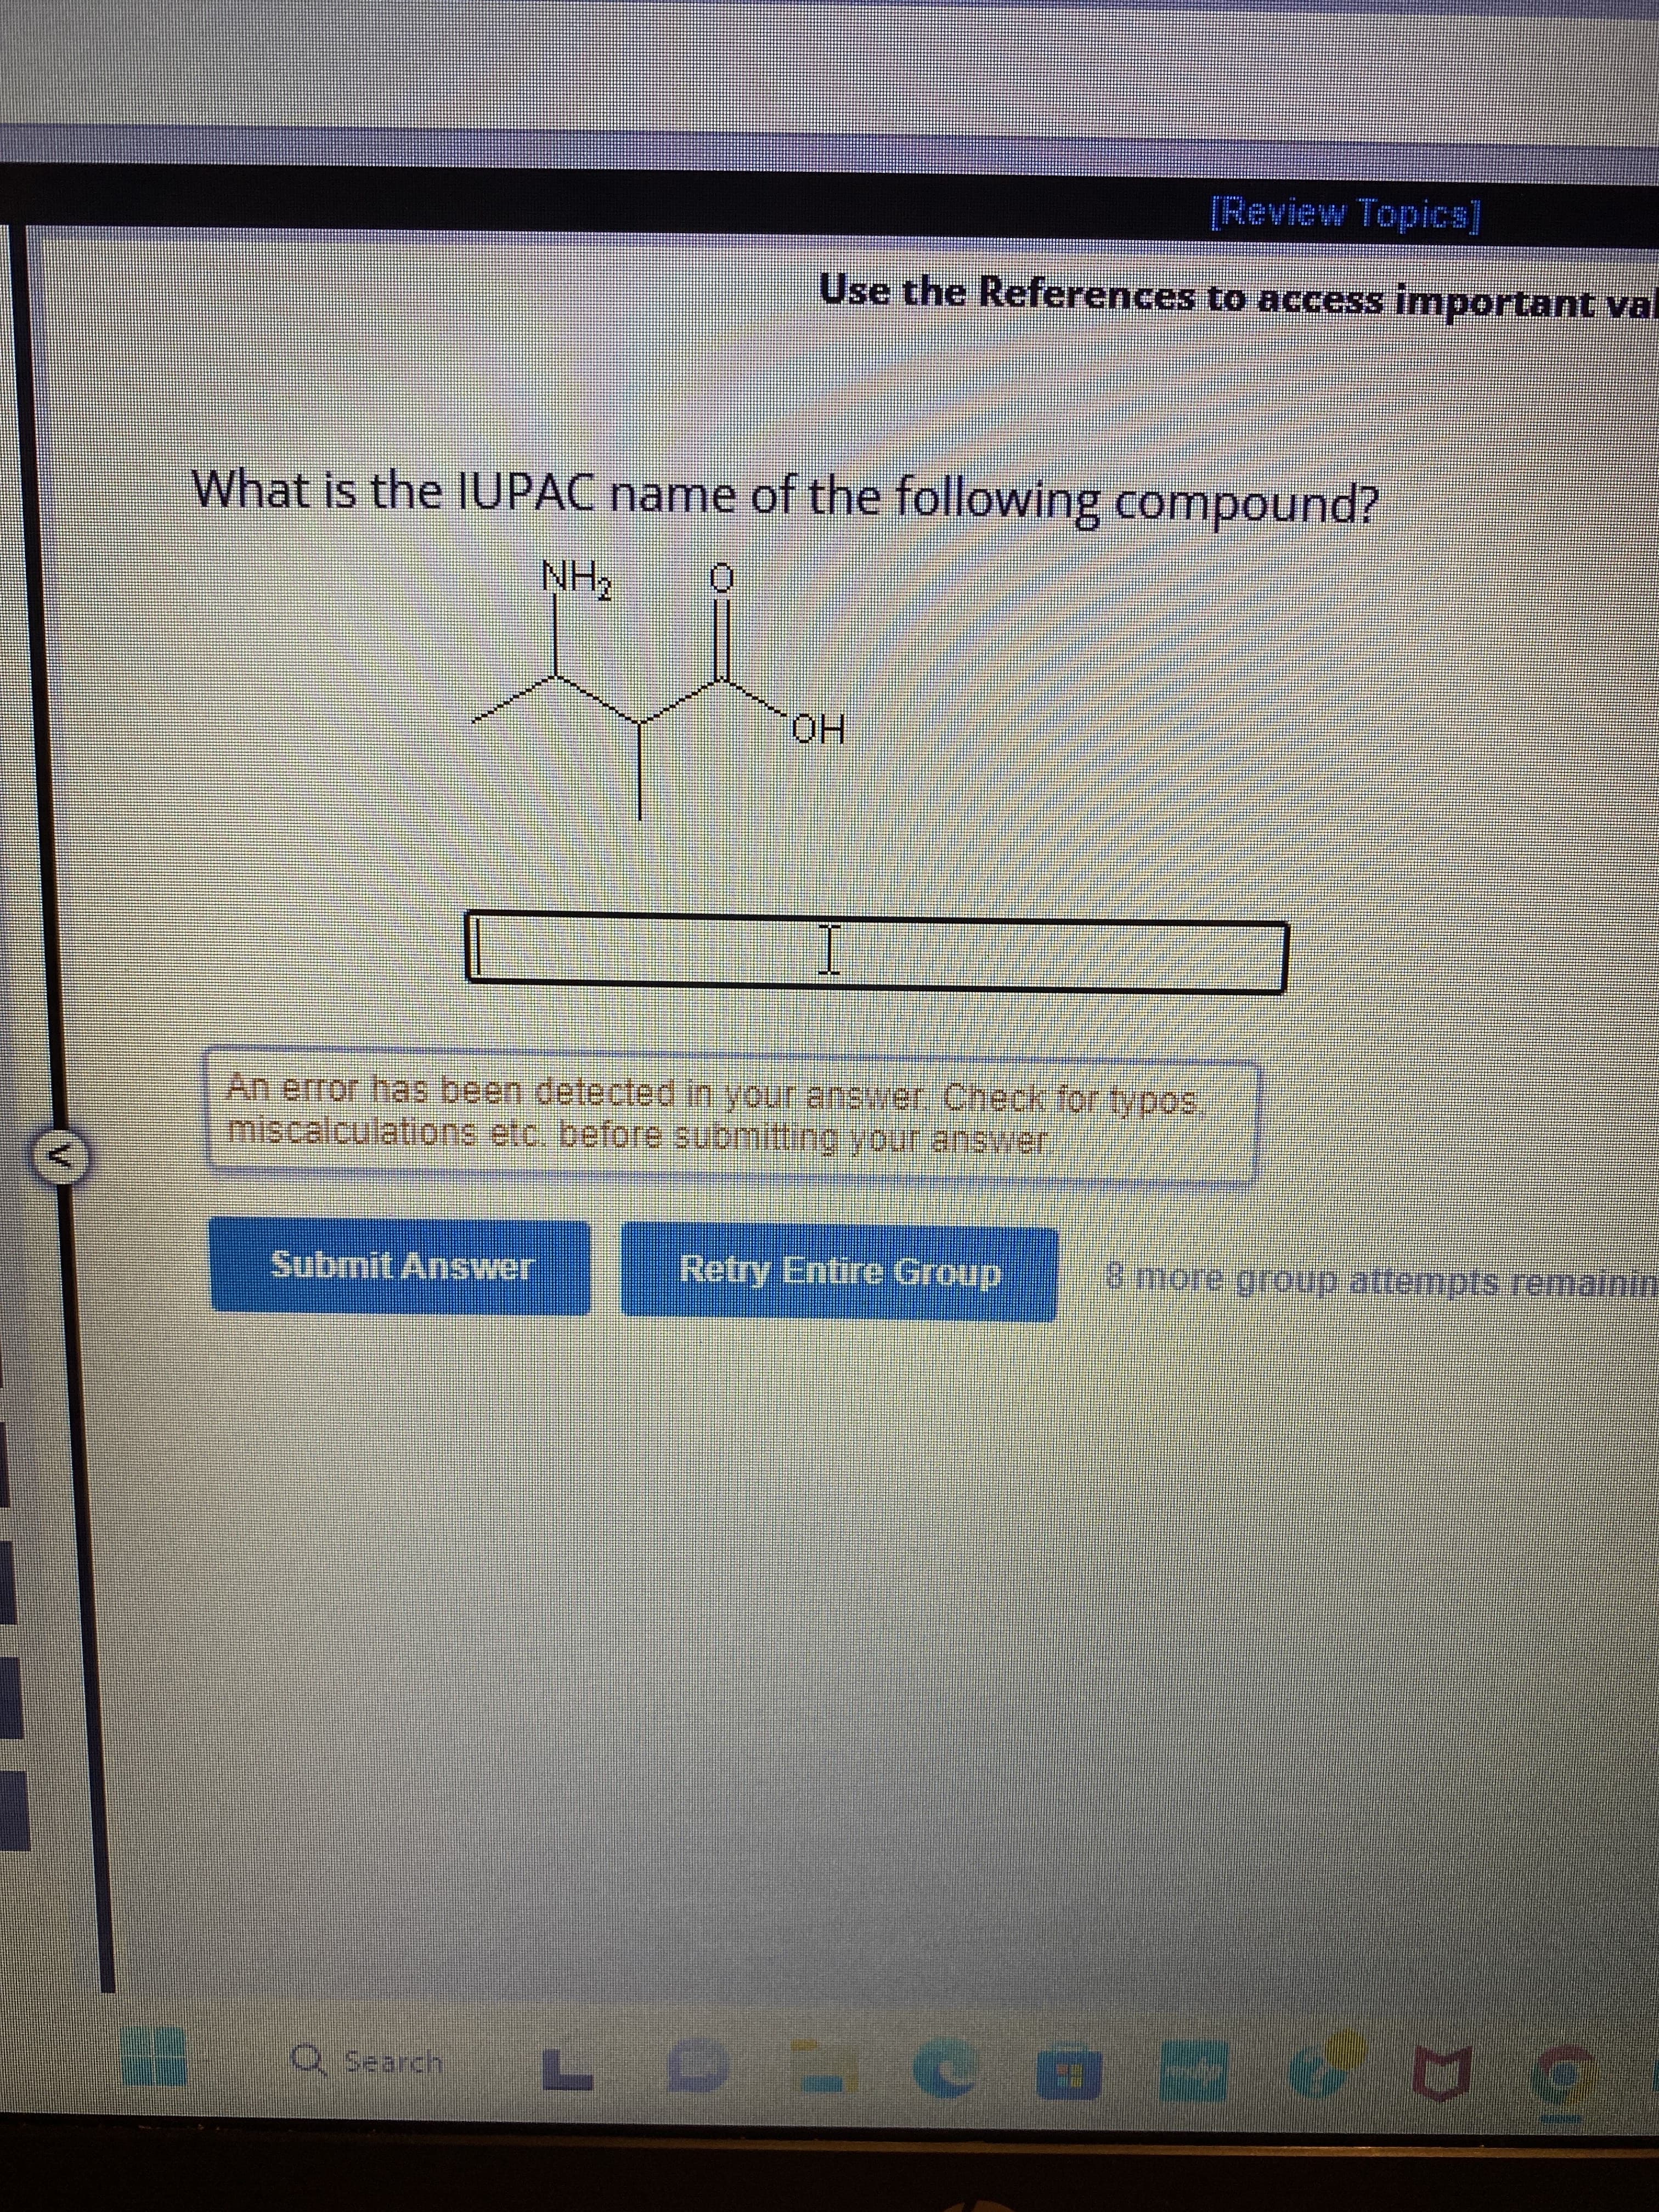 IN
What is the IUPAC name of the following compound?
NH₂
Submit Answer
indes
Q Search
BOLES
[Review Topics]
Use the References to access important val
O
OH
I
An error has been detected in your answer. Check for typos.
miscalculations etc. before submitting your answer
Retry Entire Group
SAKSASS
LDLC
8 more group attempts remainin
H
409